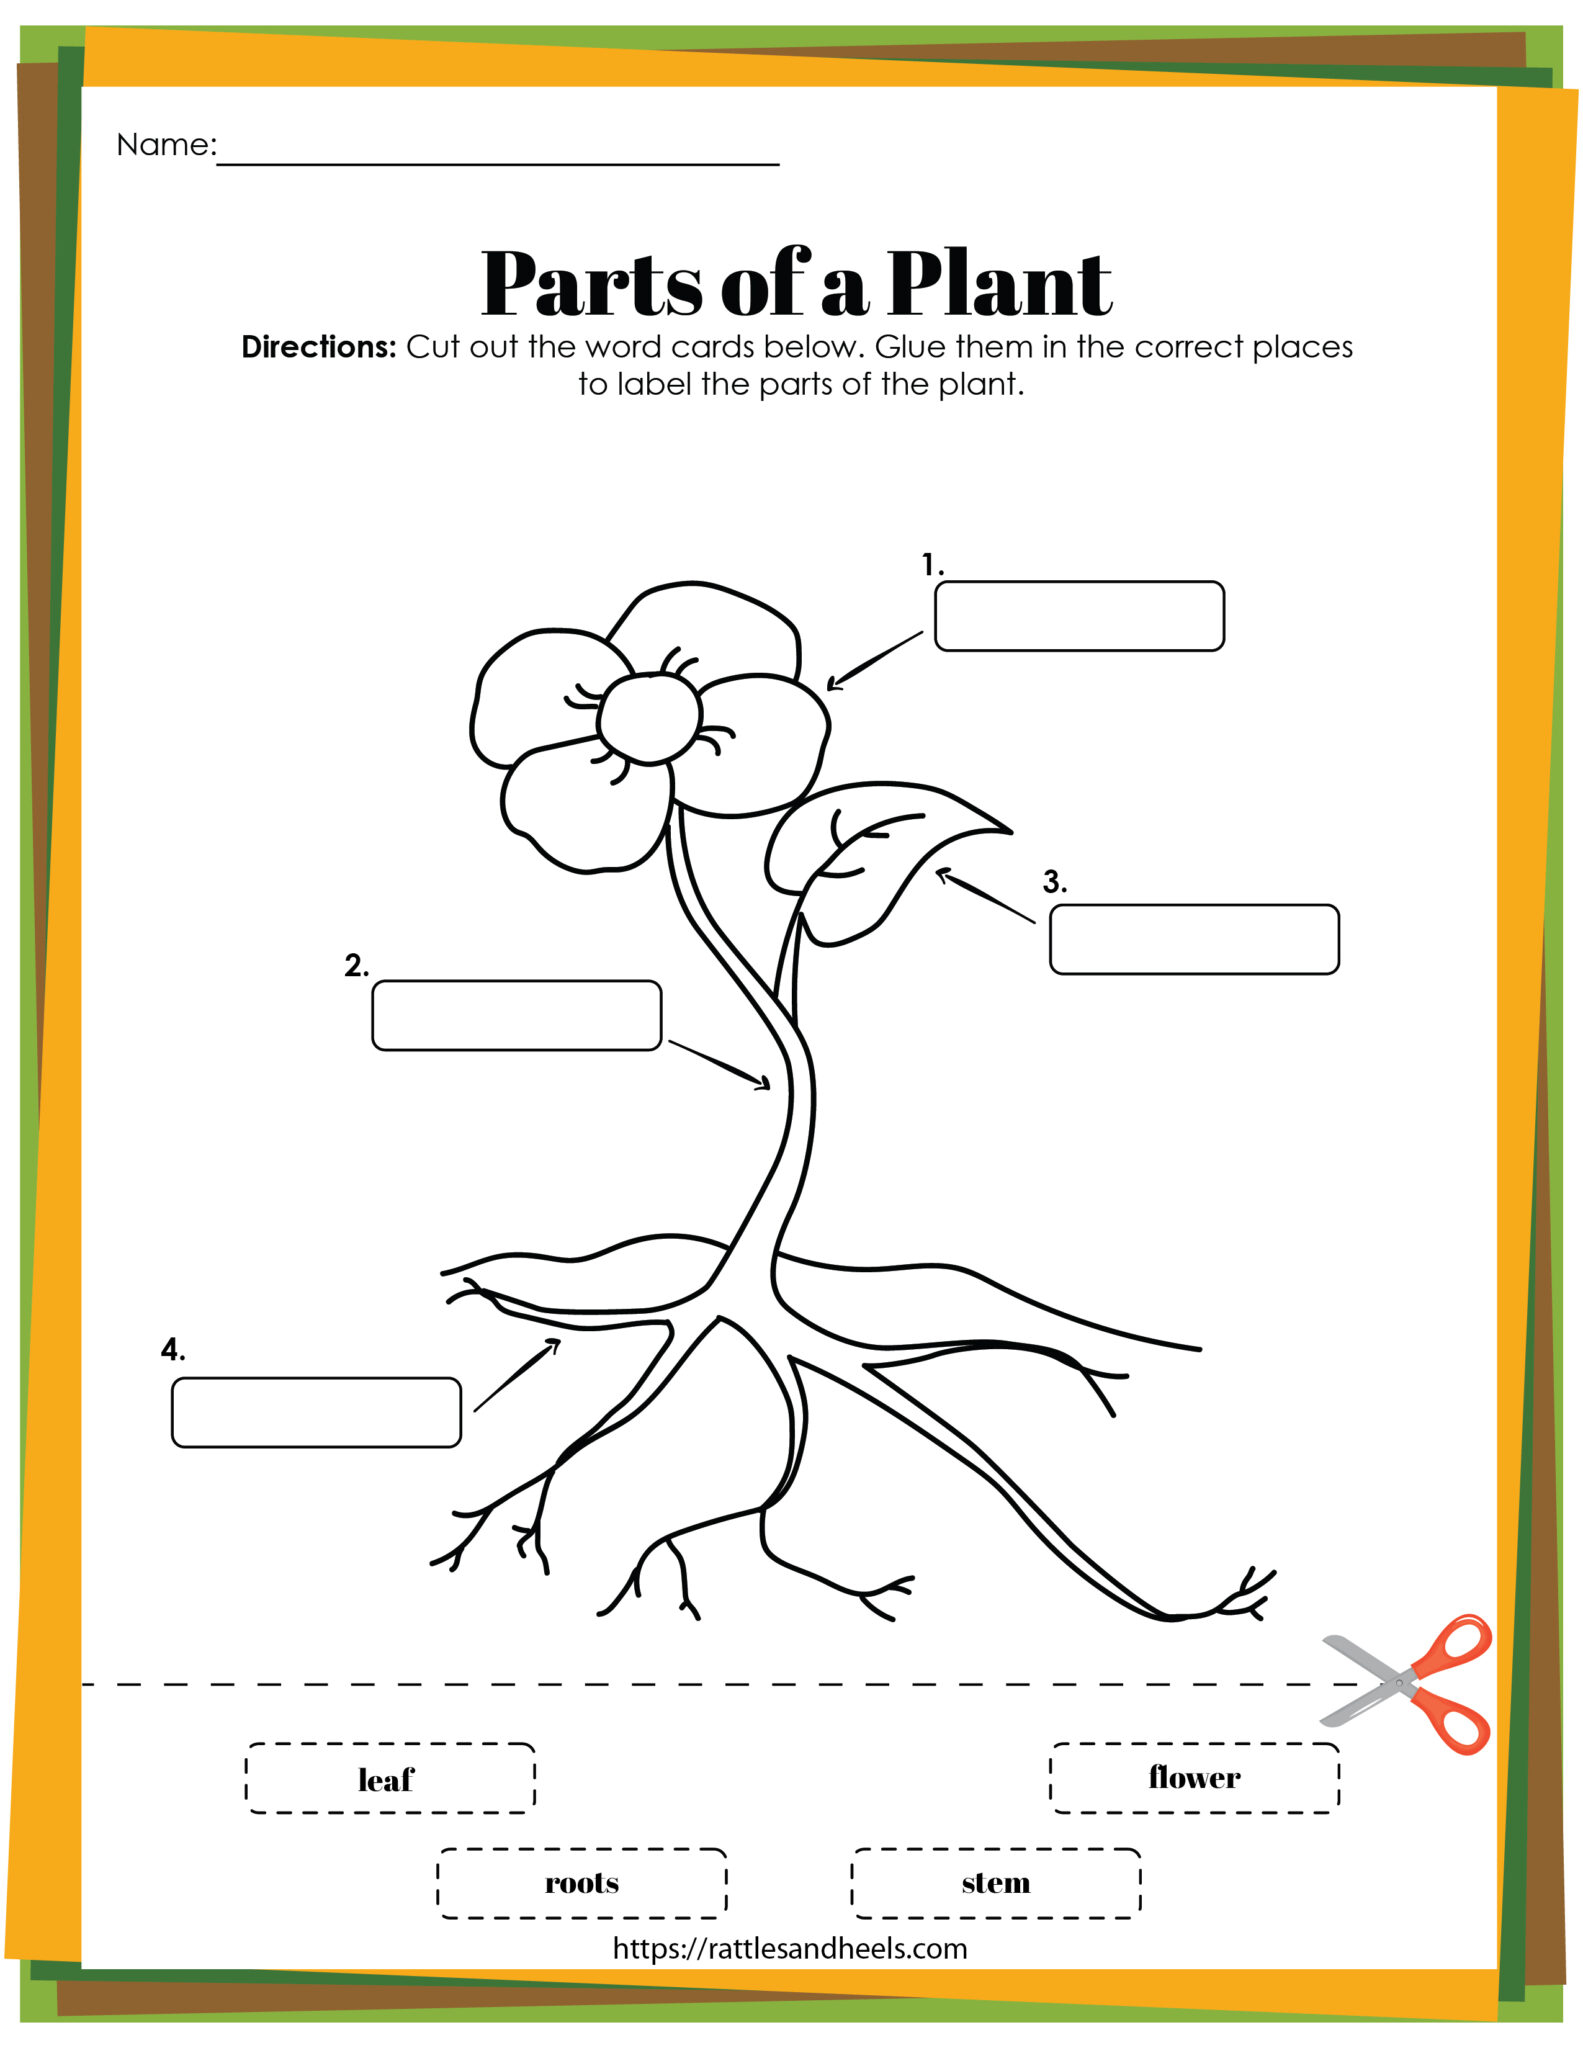 life-cycle-of-a-plant-flash-cards-printable-science-worksheet-for